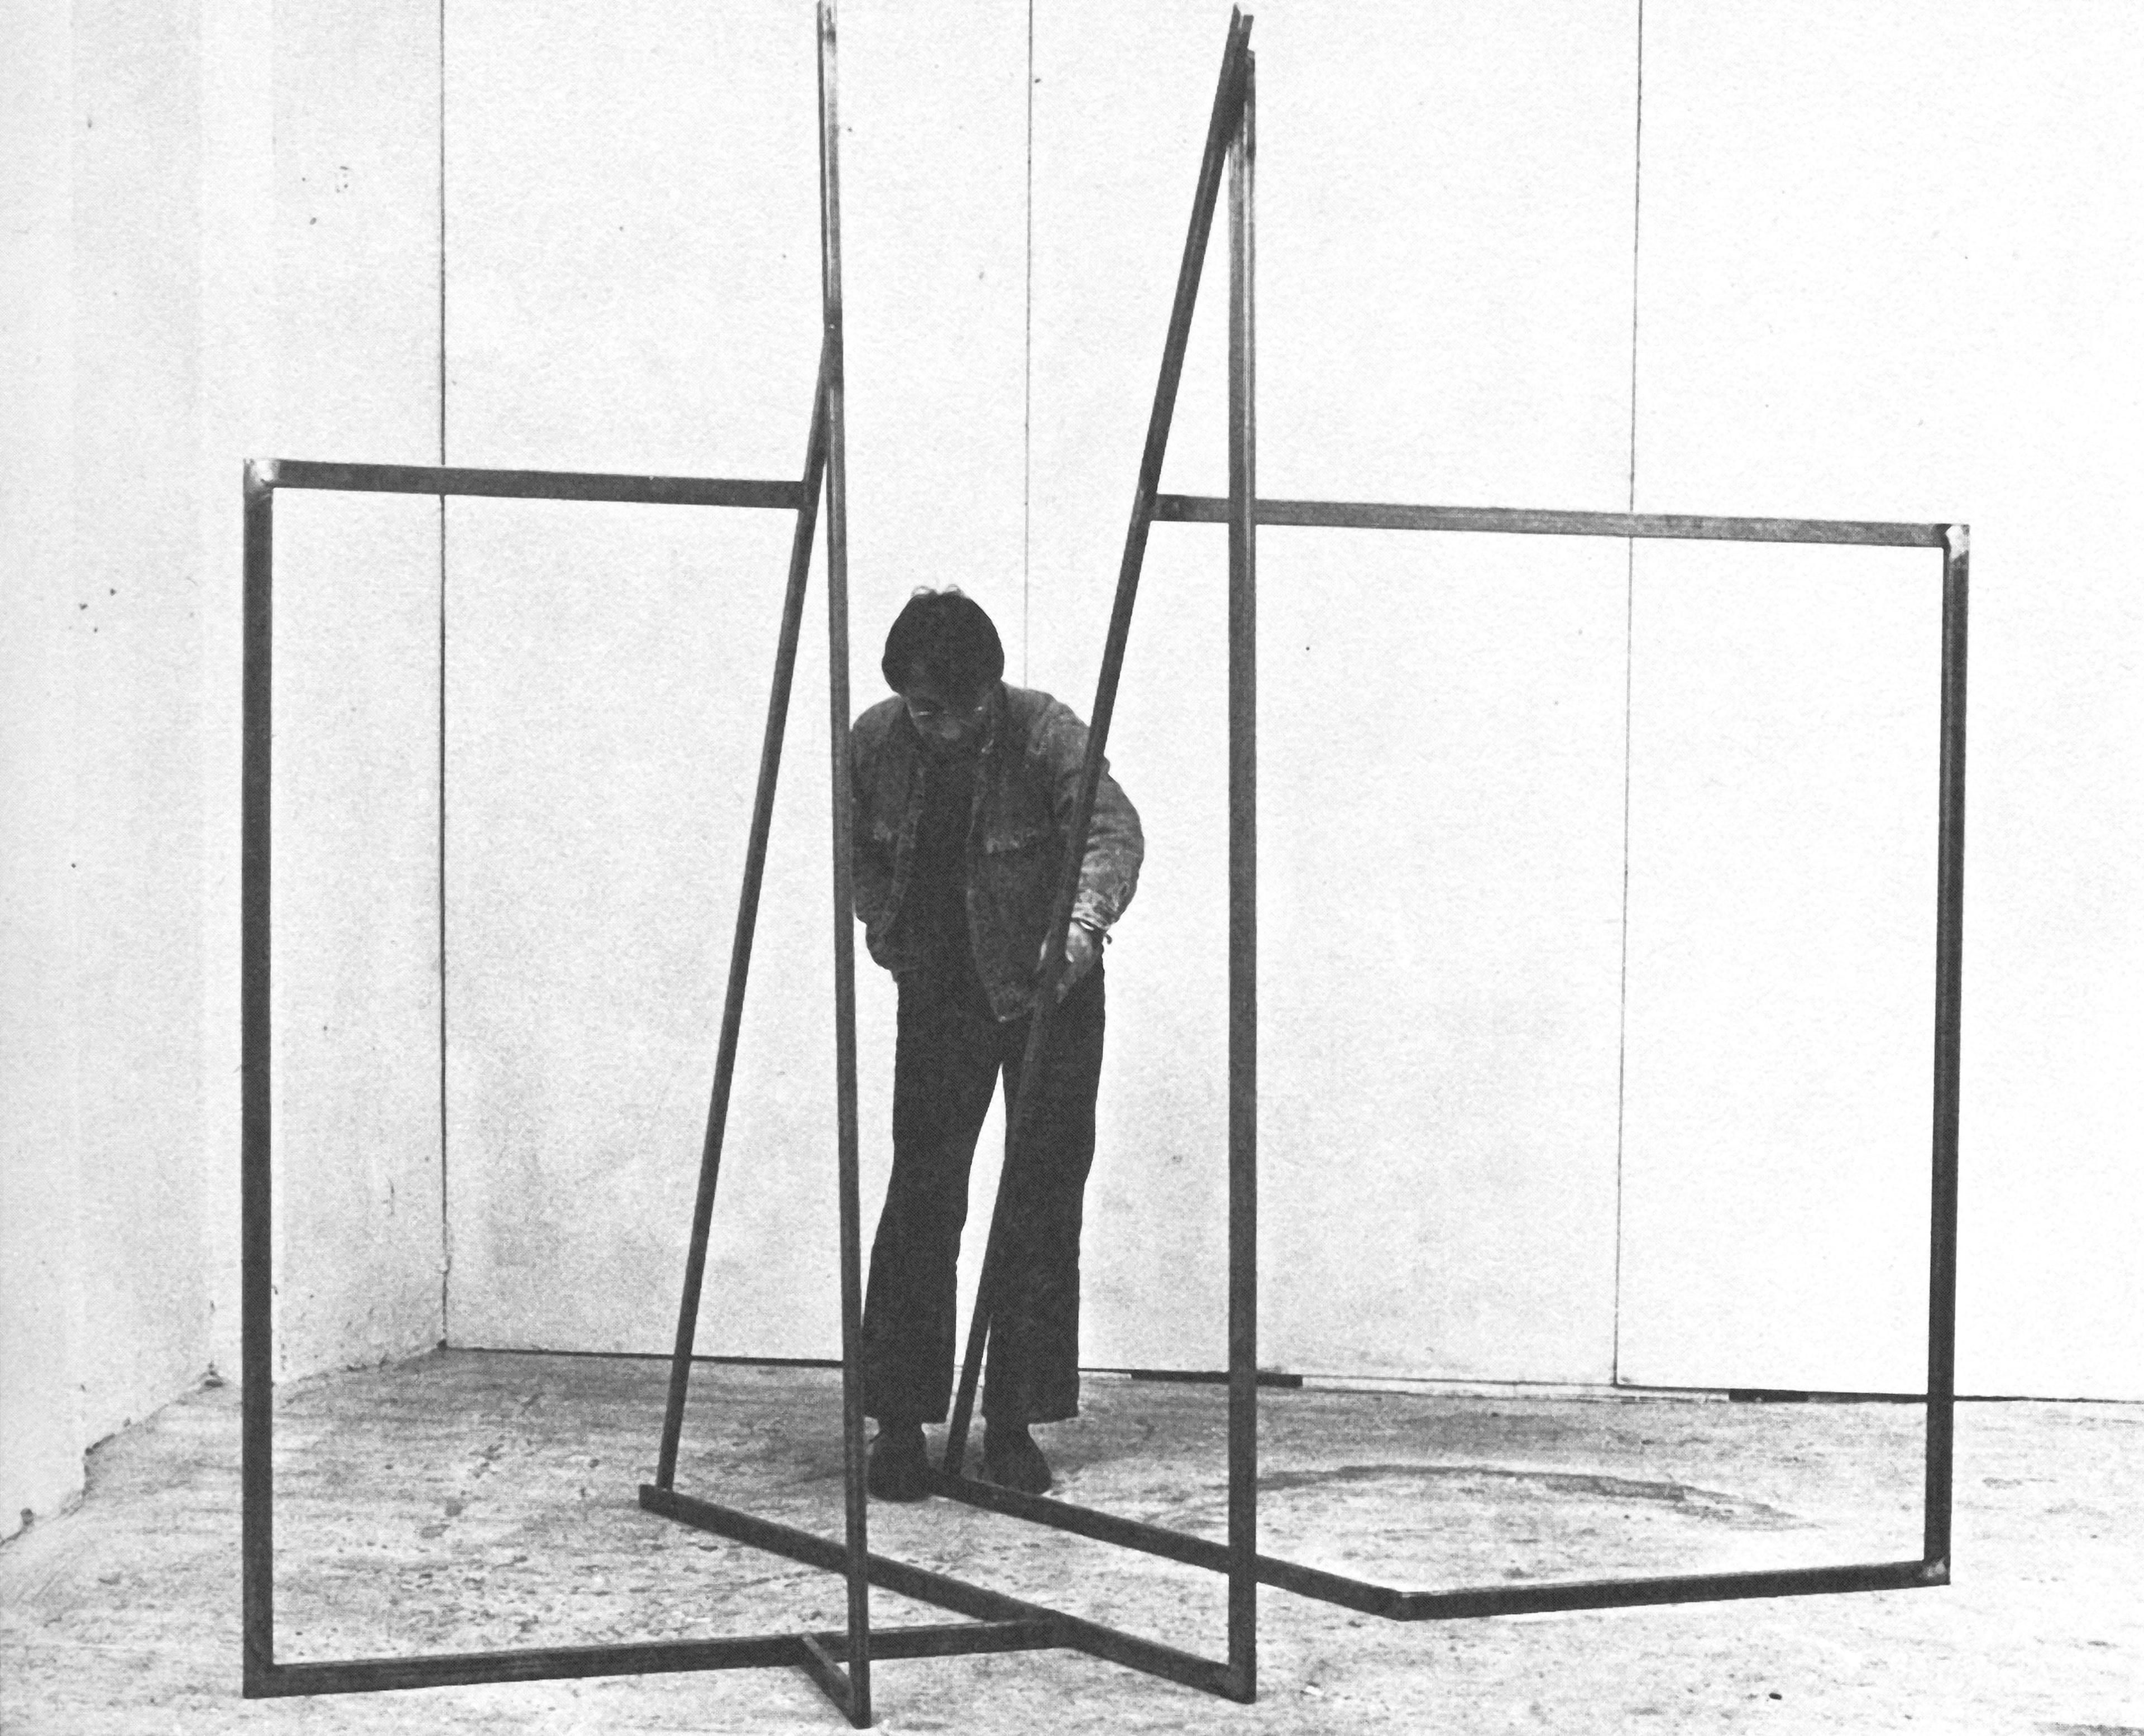 John Panting, Untitled, 1972-73, steel, 290 x 455 x 244cm. Image copyright of Stephen Cox, the Estate of John Panting and Poussin Gallery.